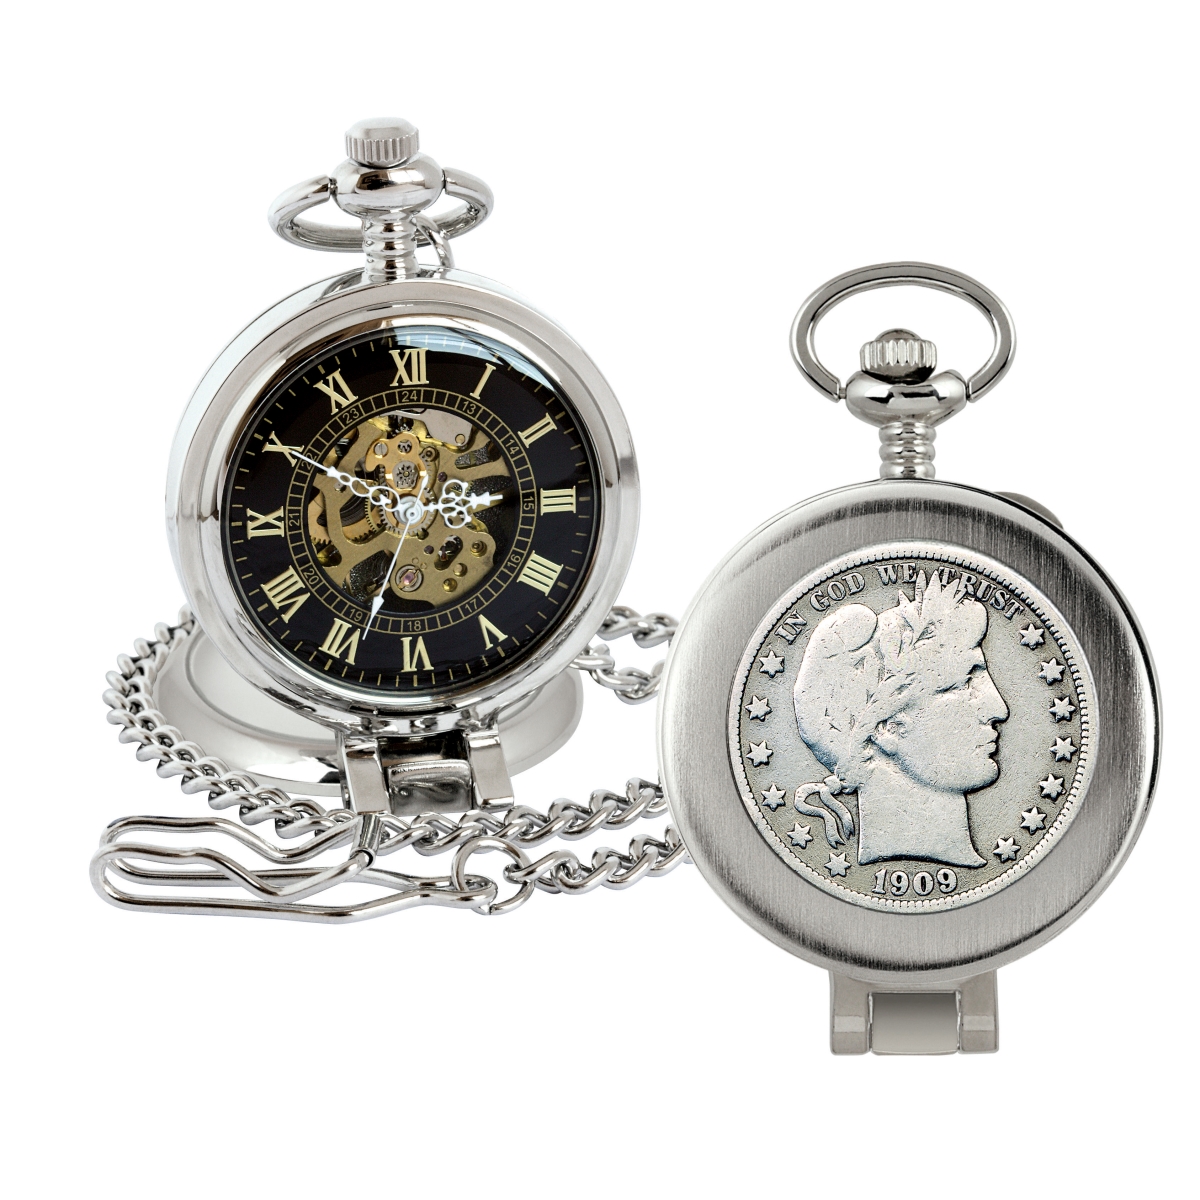 Picture of American Coin Treasures 16272 Silver Barber Half Dollar Coin Pocket Watch with Skeleton Movement, Black Dial with Gold Roman Numerals - Magnifying Glass